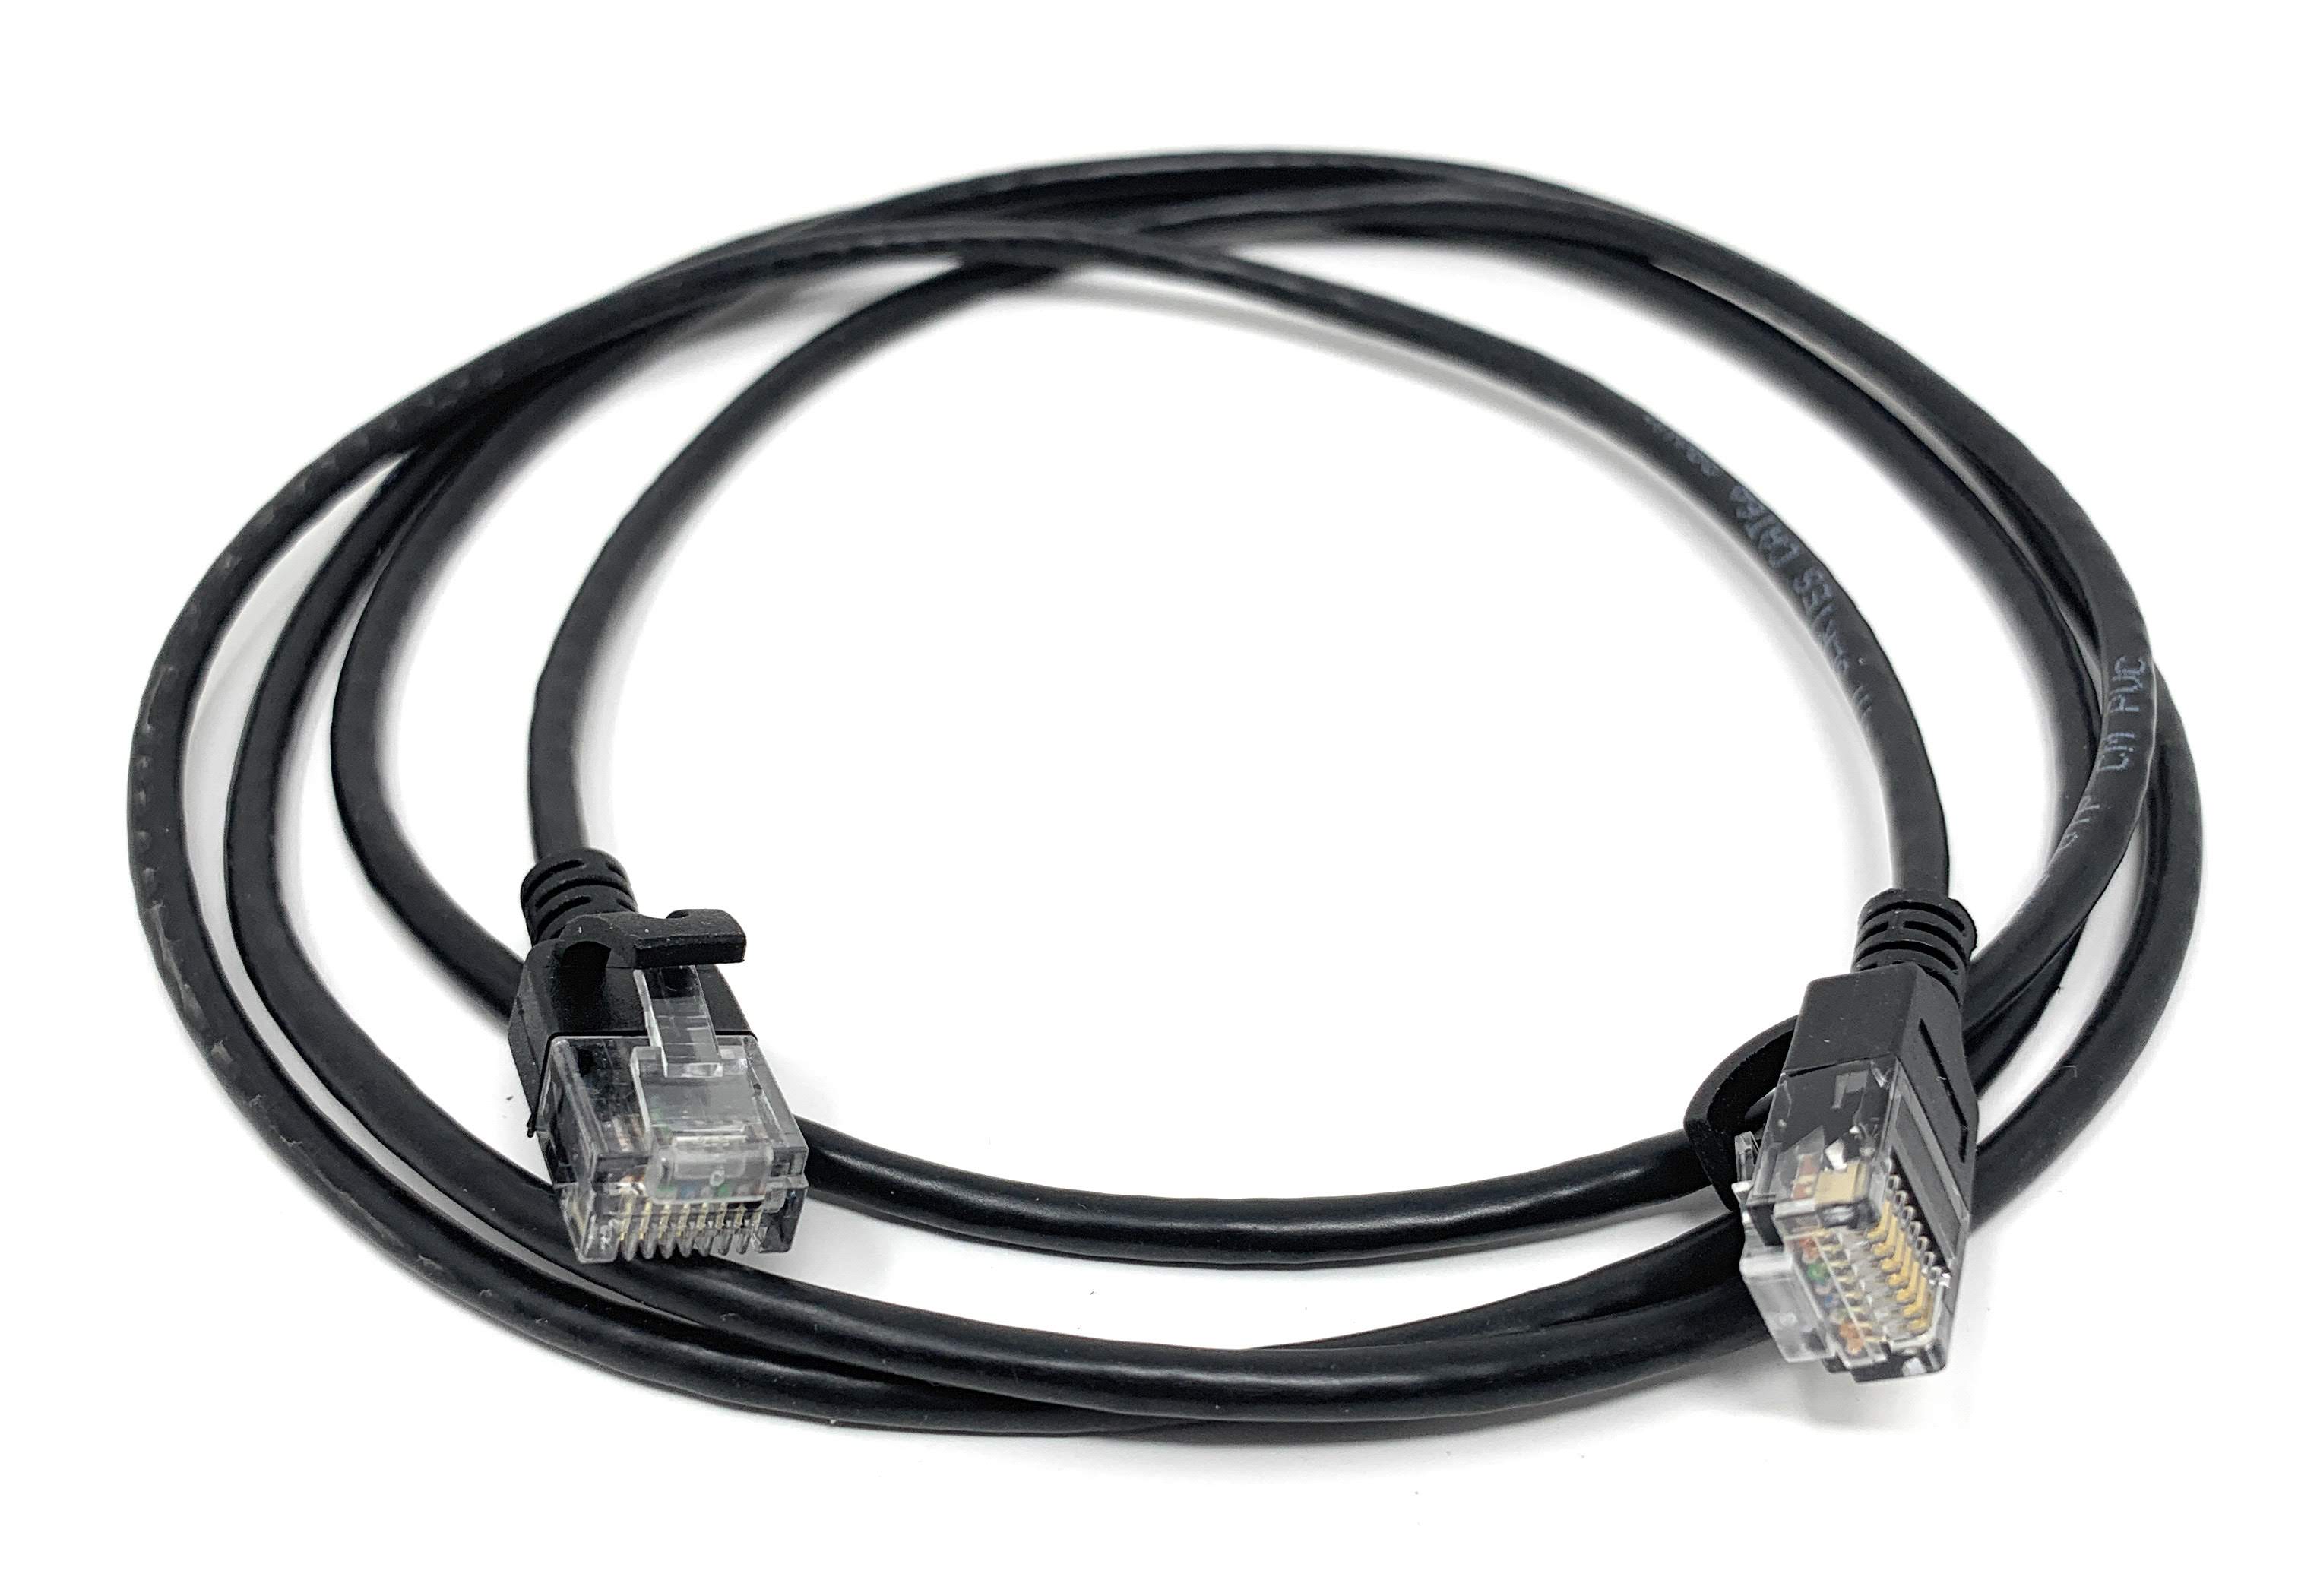 Category 6a 28awg Patch Cables with Slim Jacket